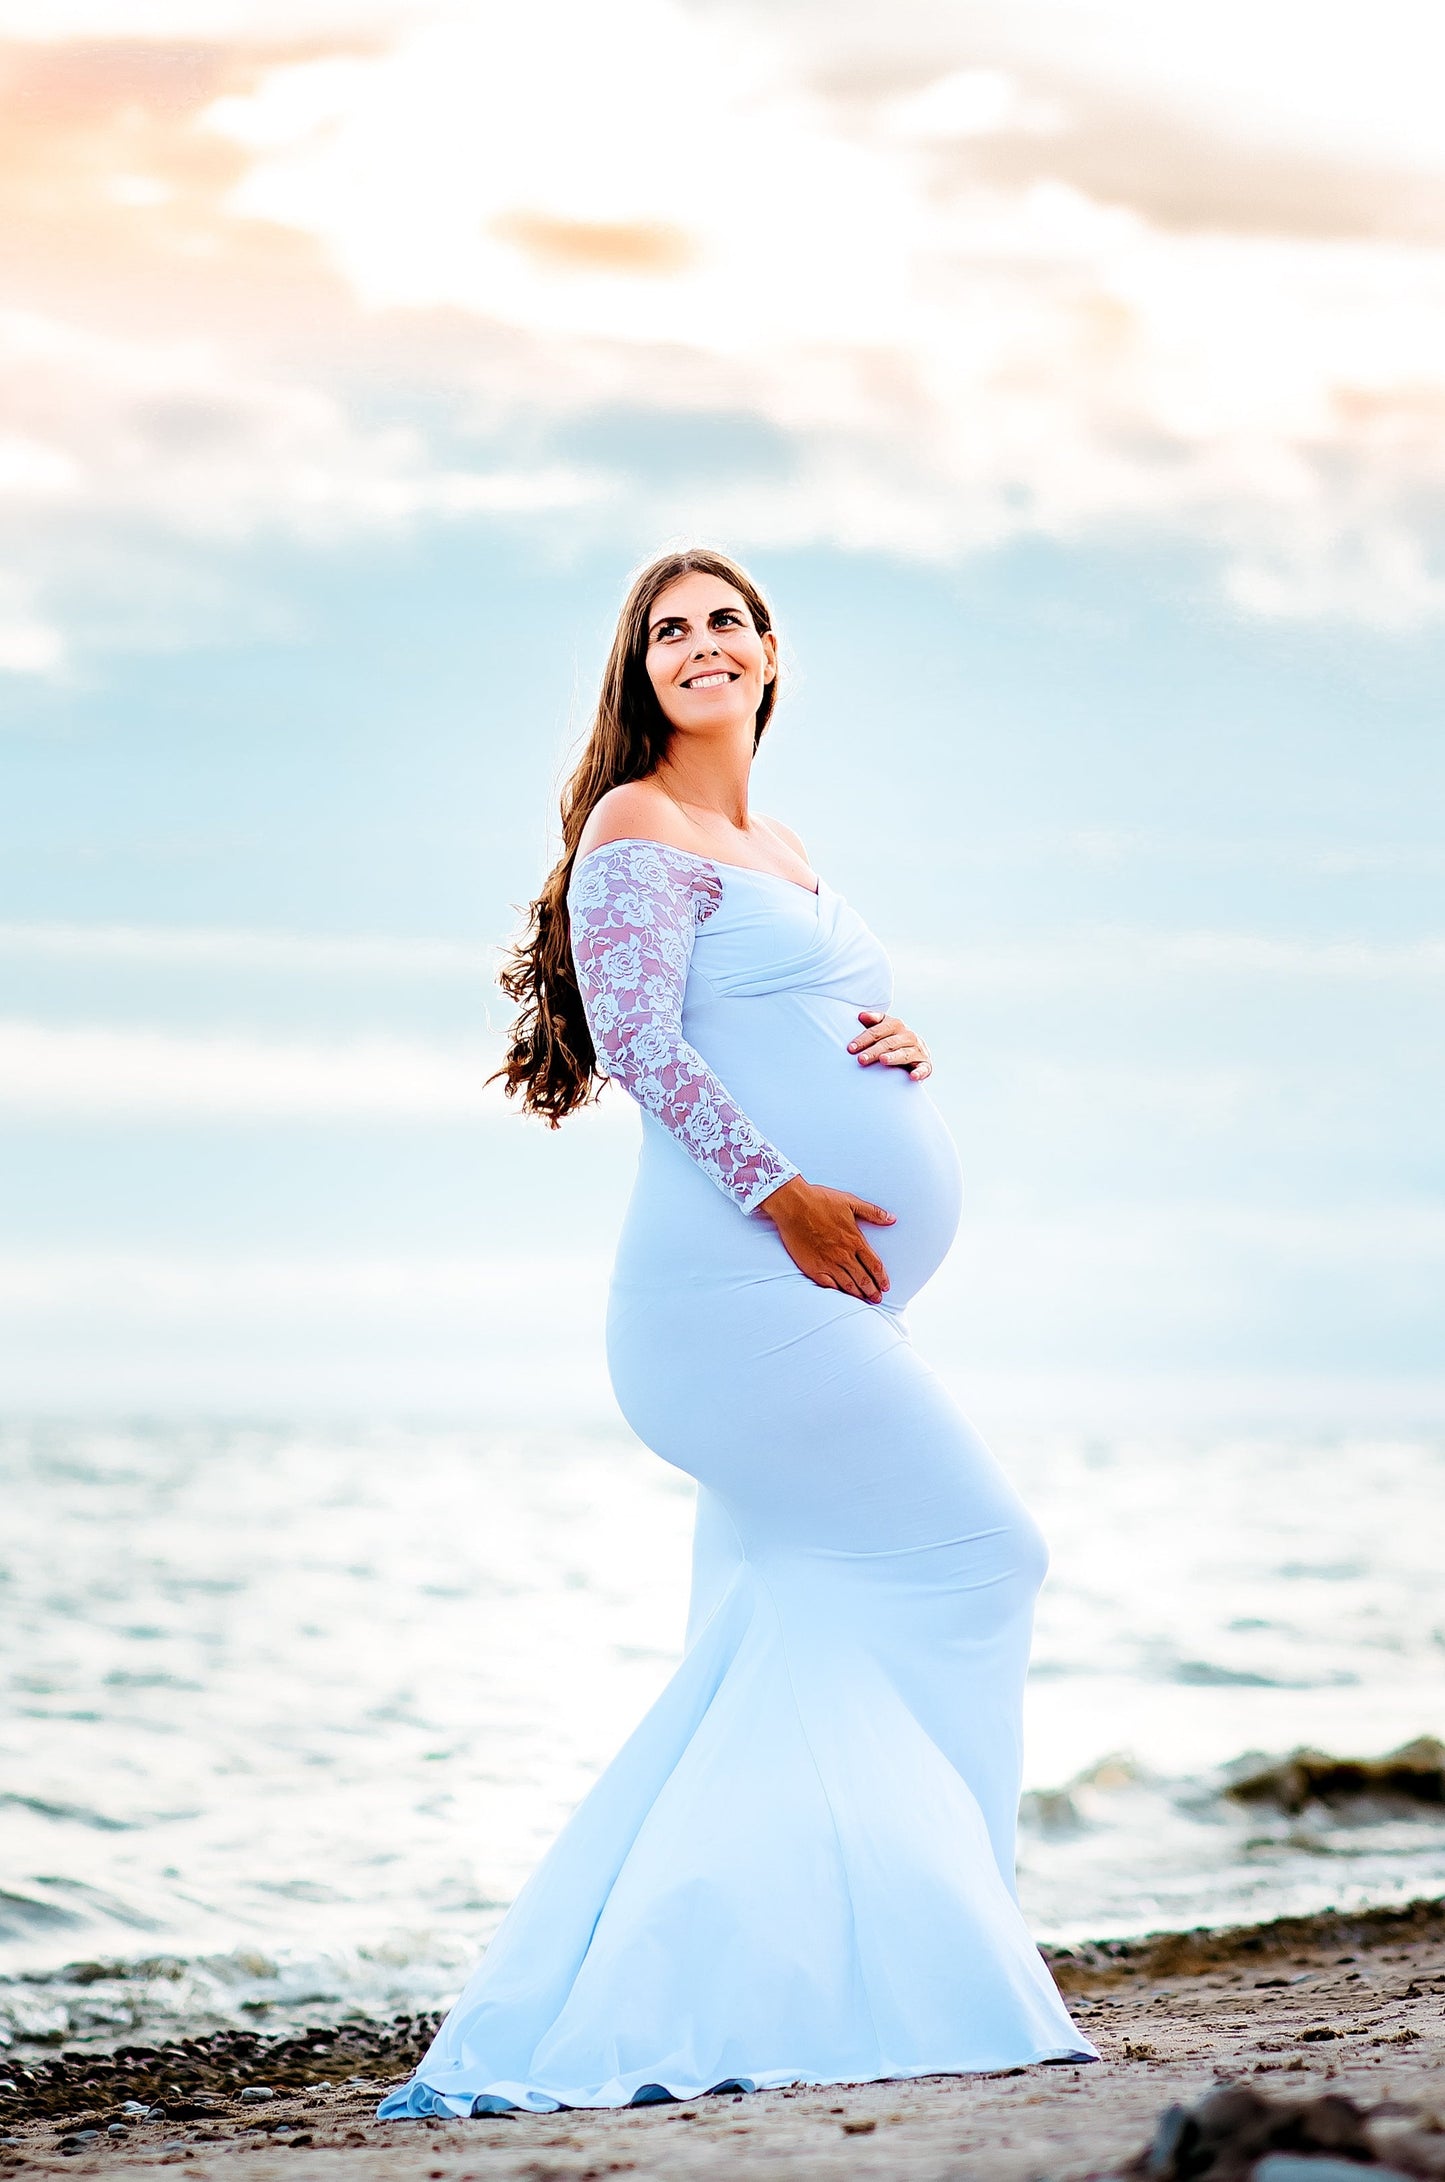 White Fitted Lace Sleeves - maternity photoshoot dress